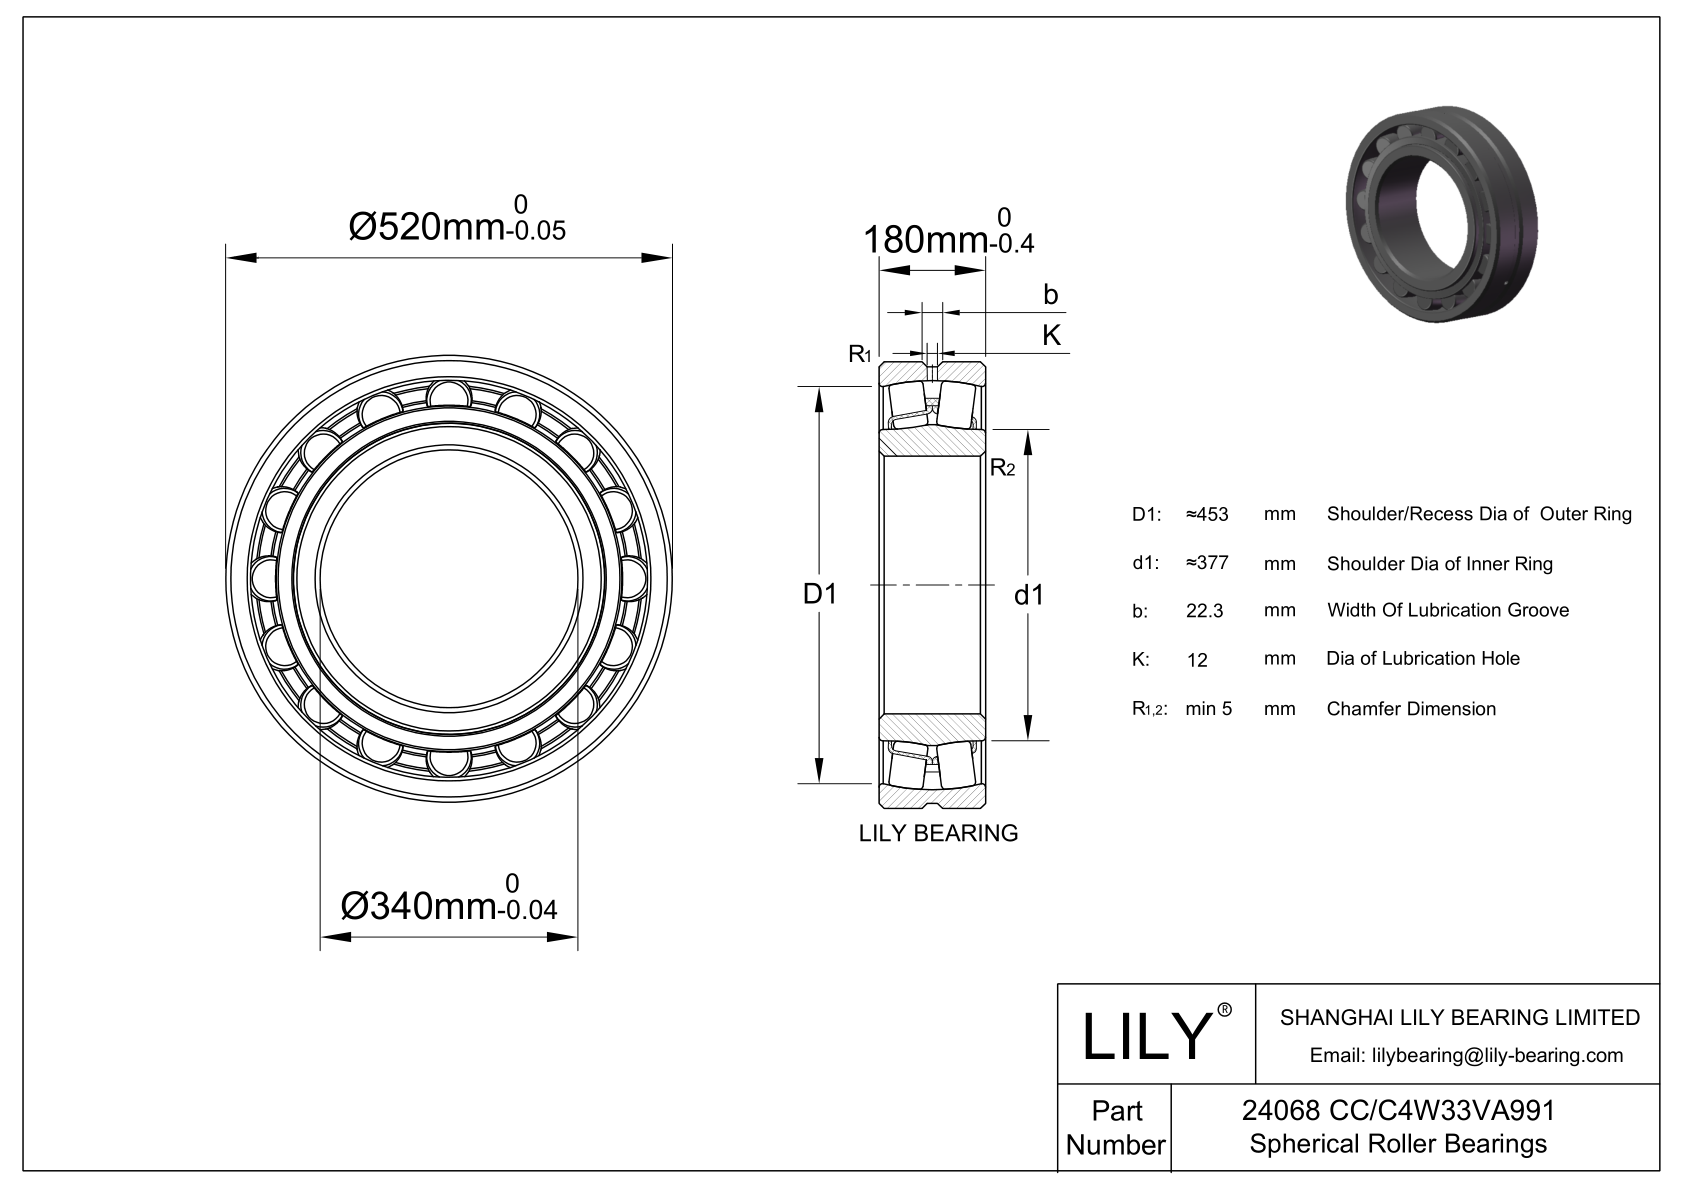 24068 CC/C4W33VA991 Double Row Spherical Roller Bearing cad drawing